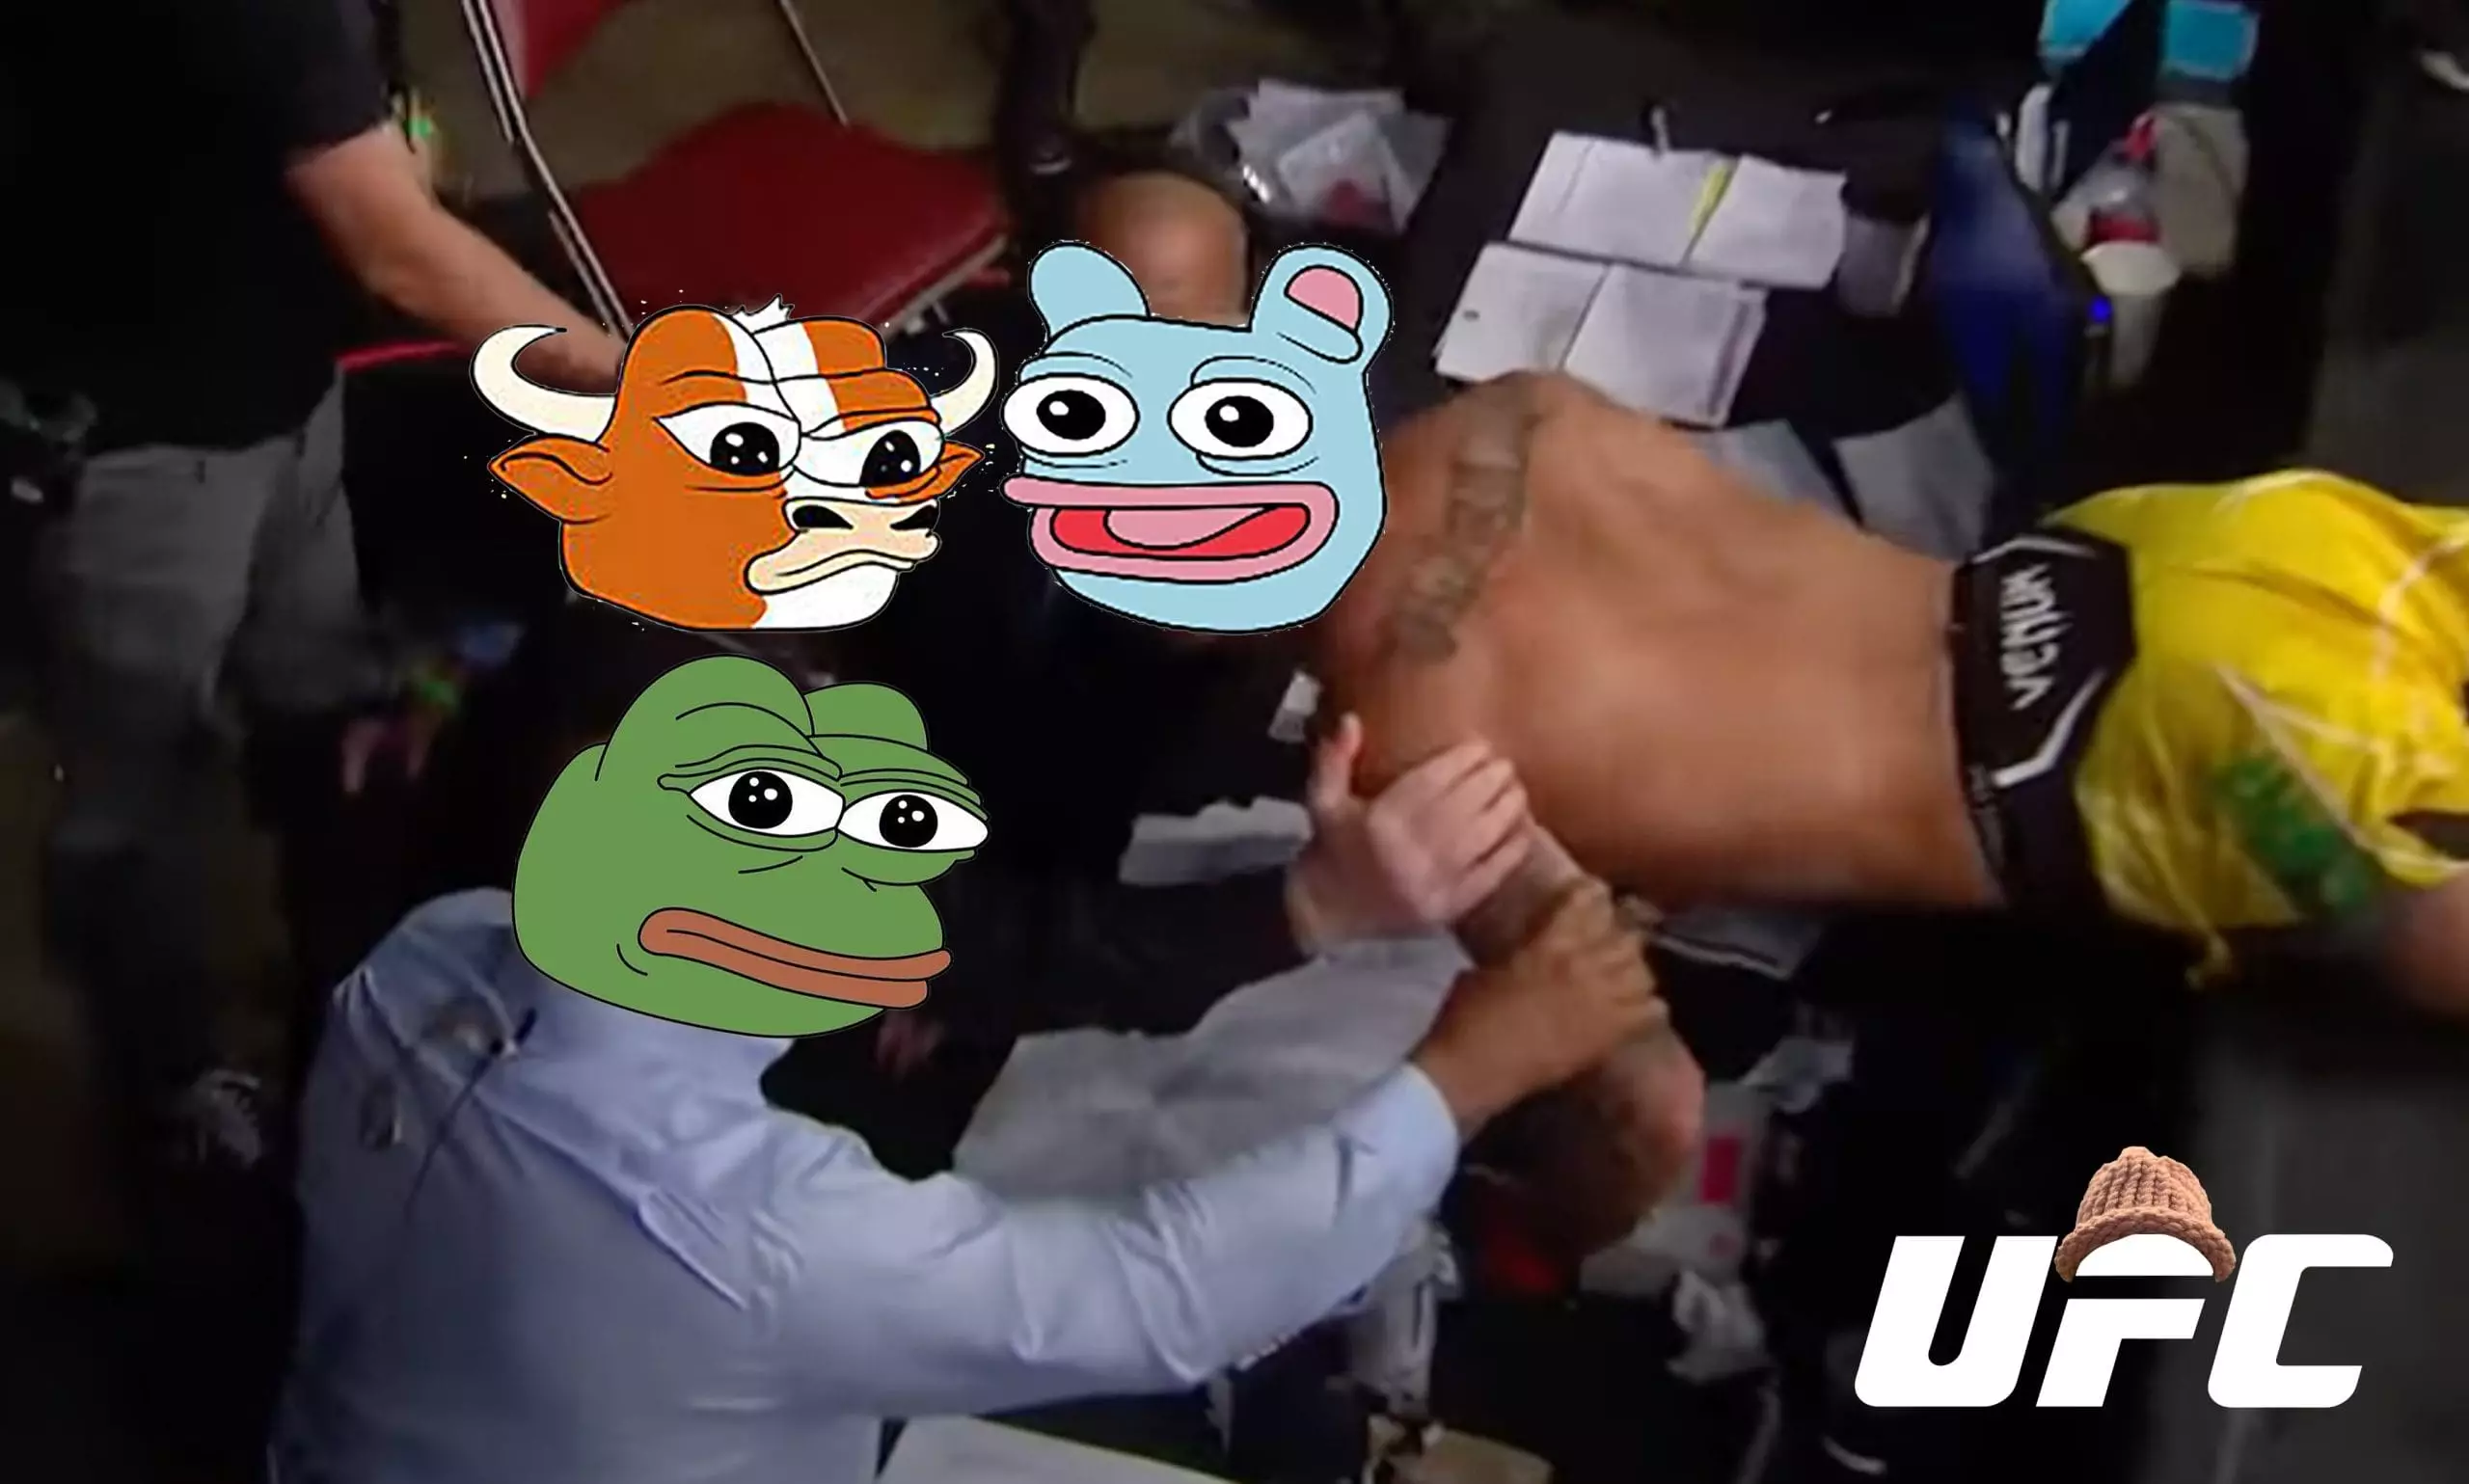 Cryptocurrency Meme Coins: A Critical Analysis of Ultimeme Fighting Championship and Dogeverse